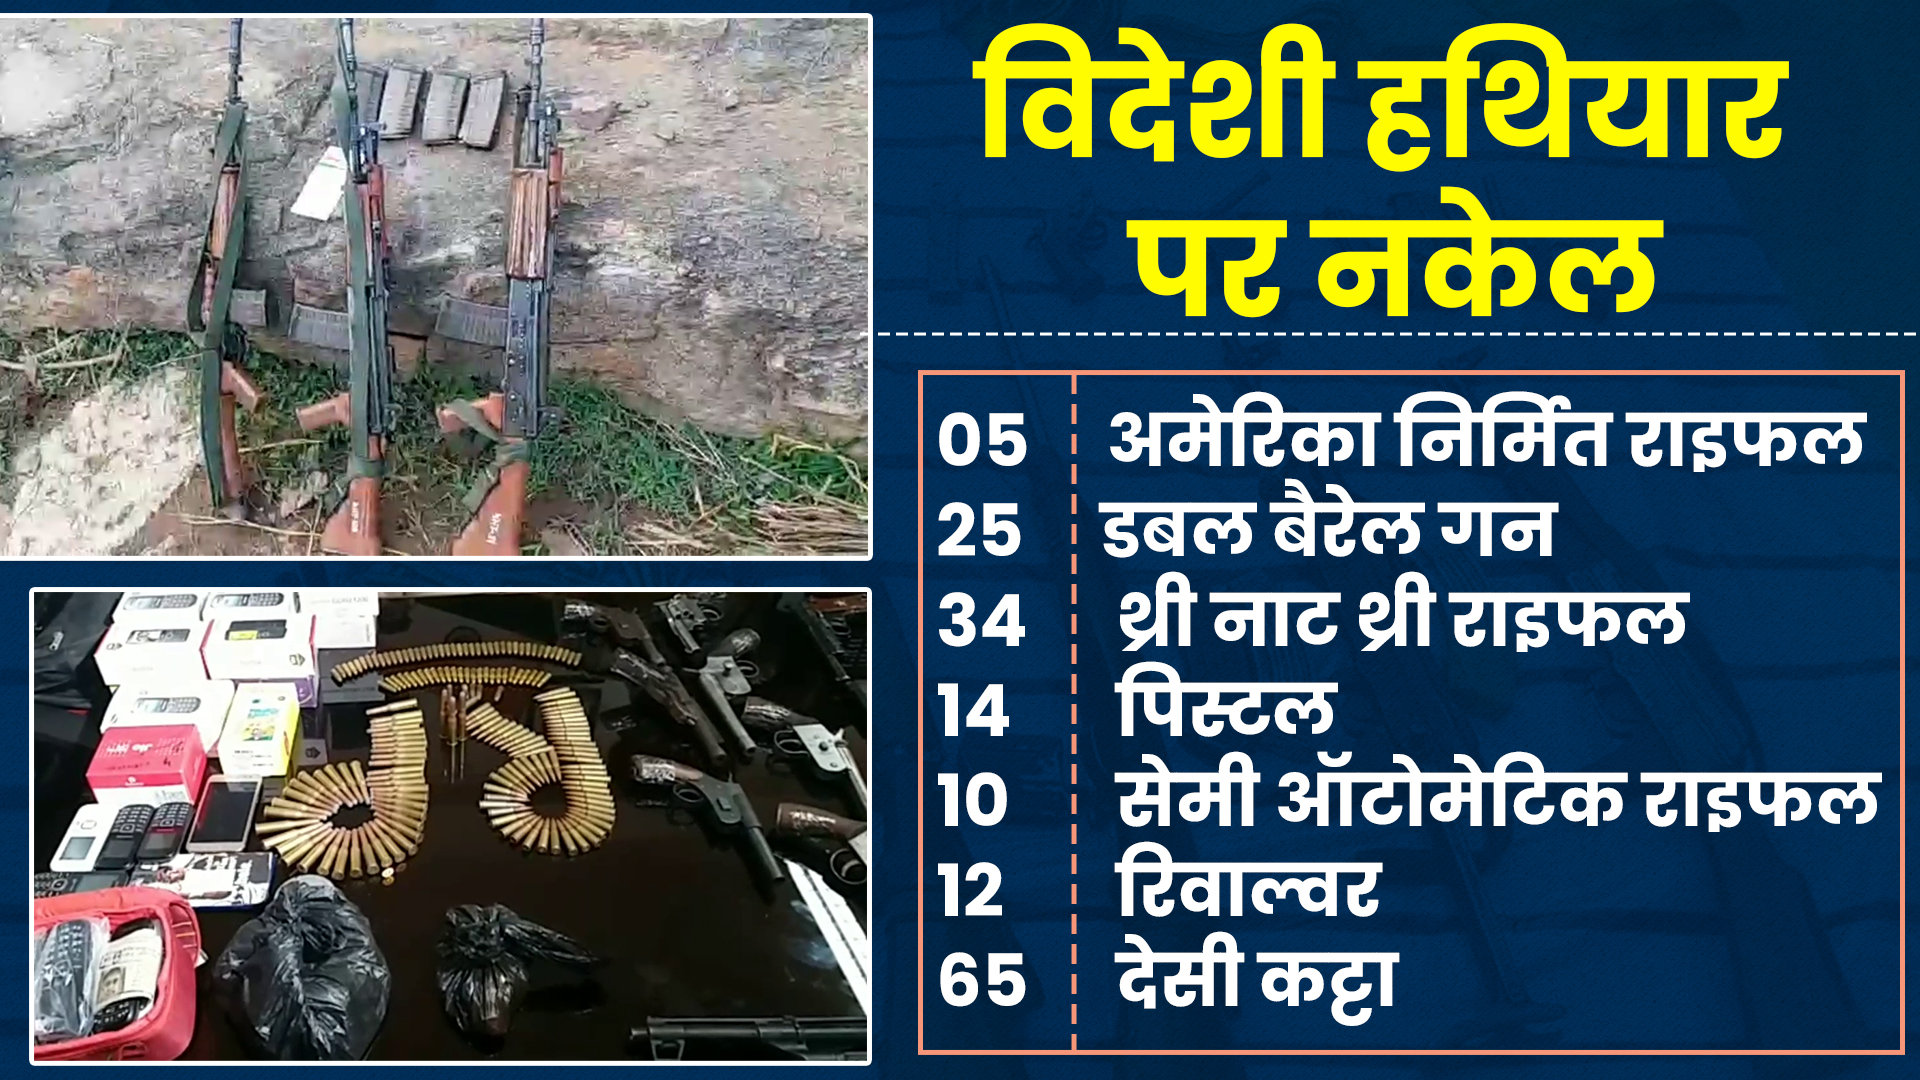 naxalites-and-criminal-gangs-armed-with-foreign-weapons-became-challenge-for-jharkhand-police